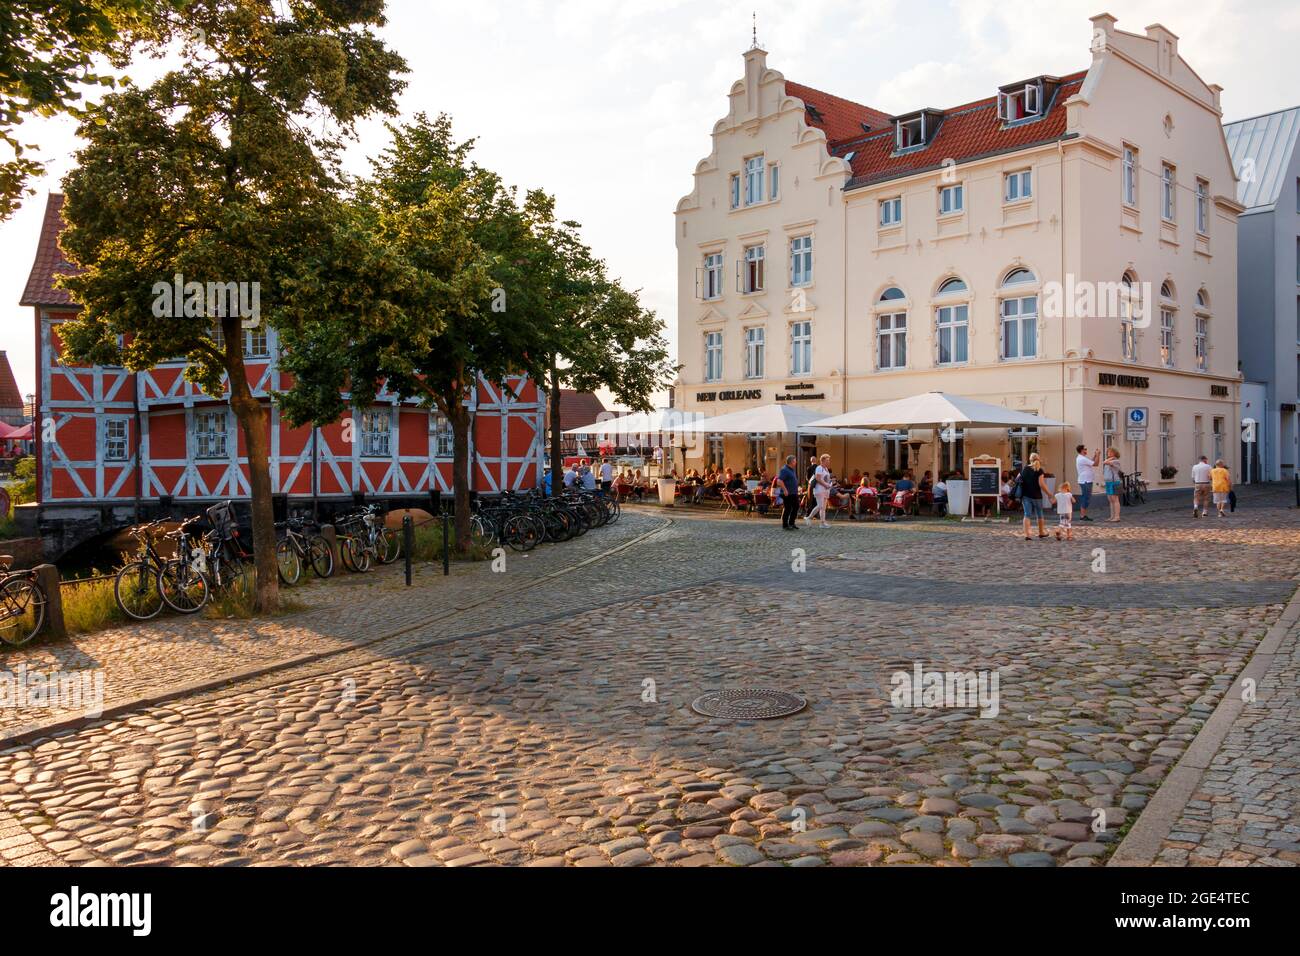 wismar, Germany - July 12, 2021: People are sitting and eating at an outdoor restaurant in the game Wismar Stock Photo